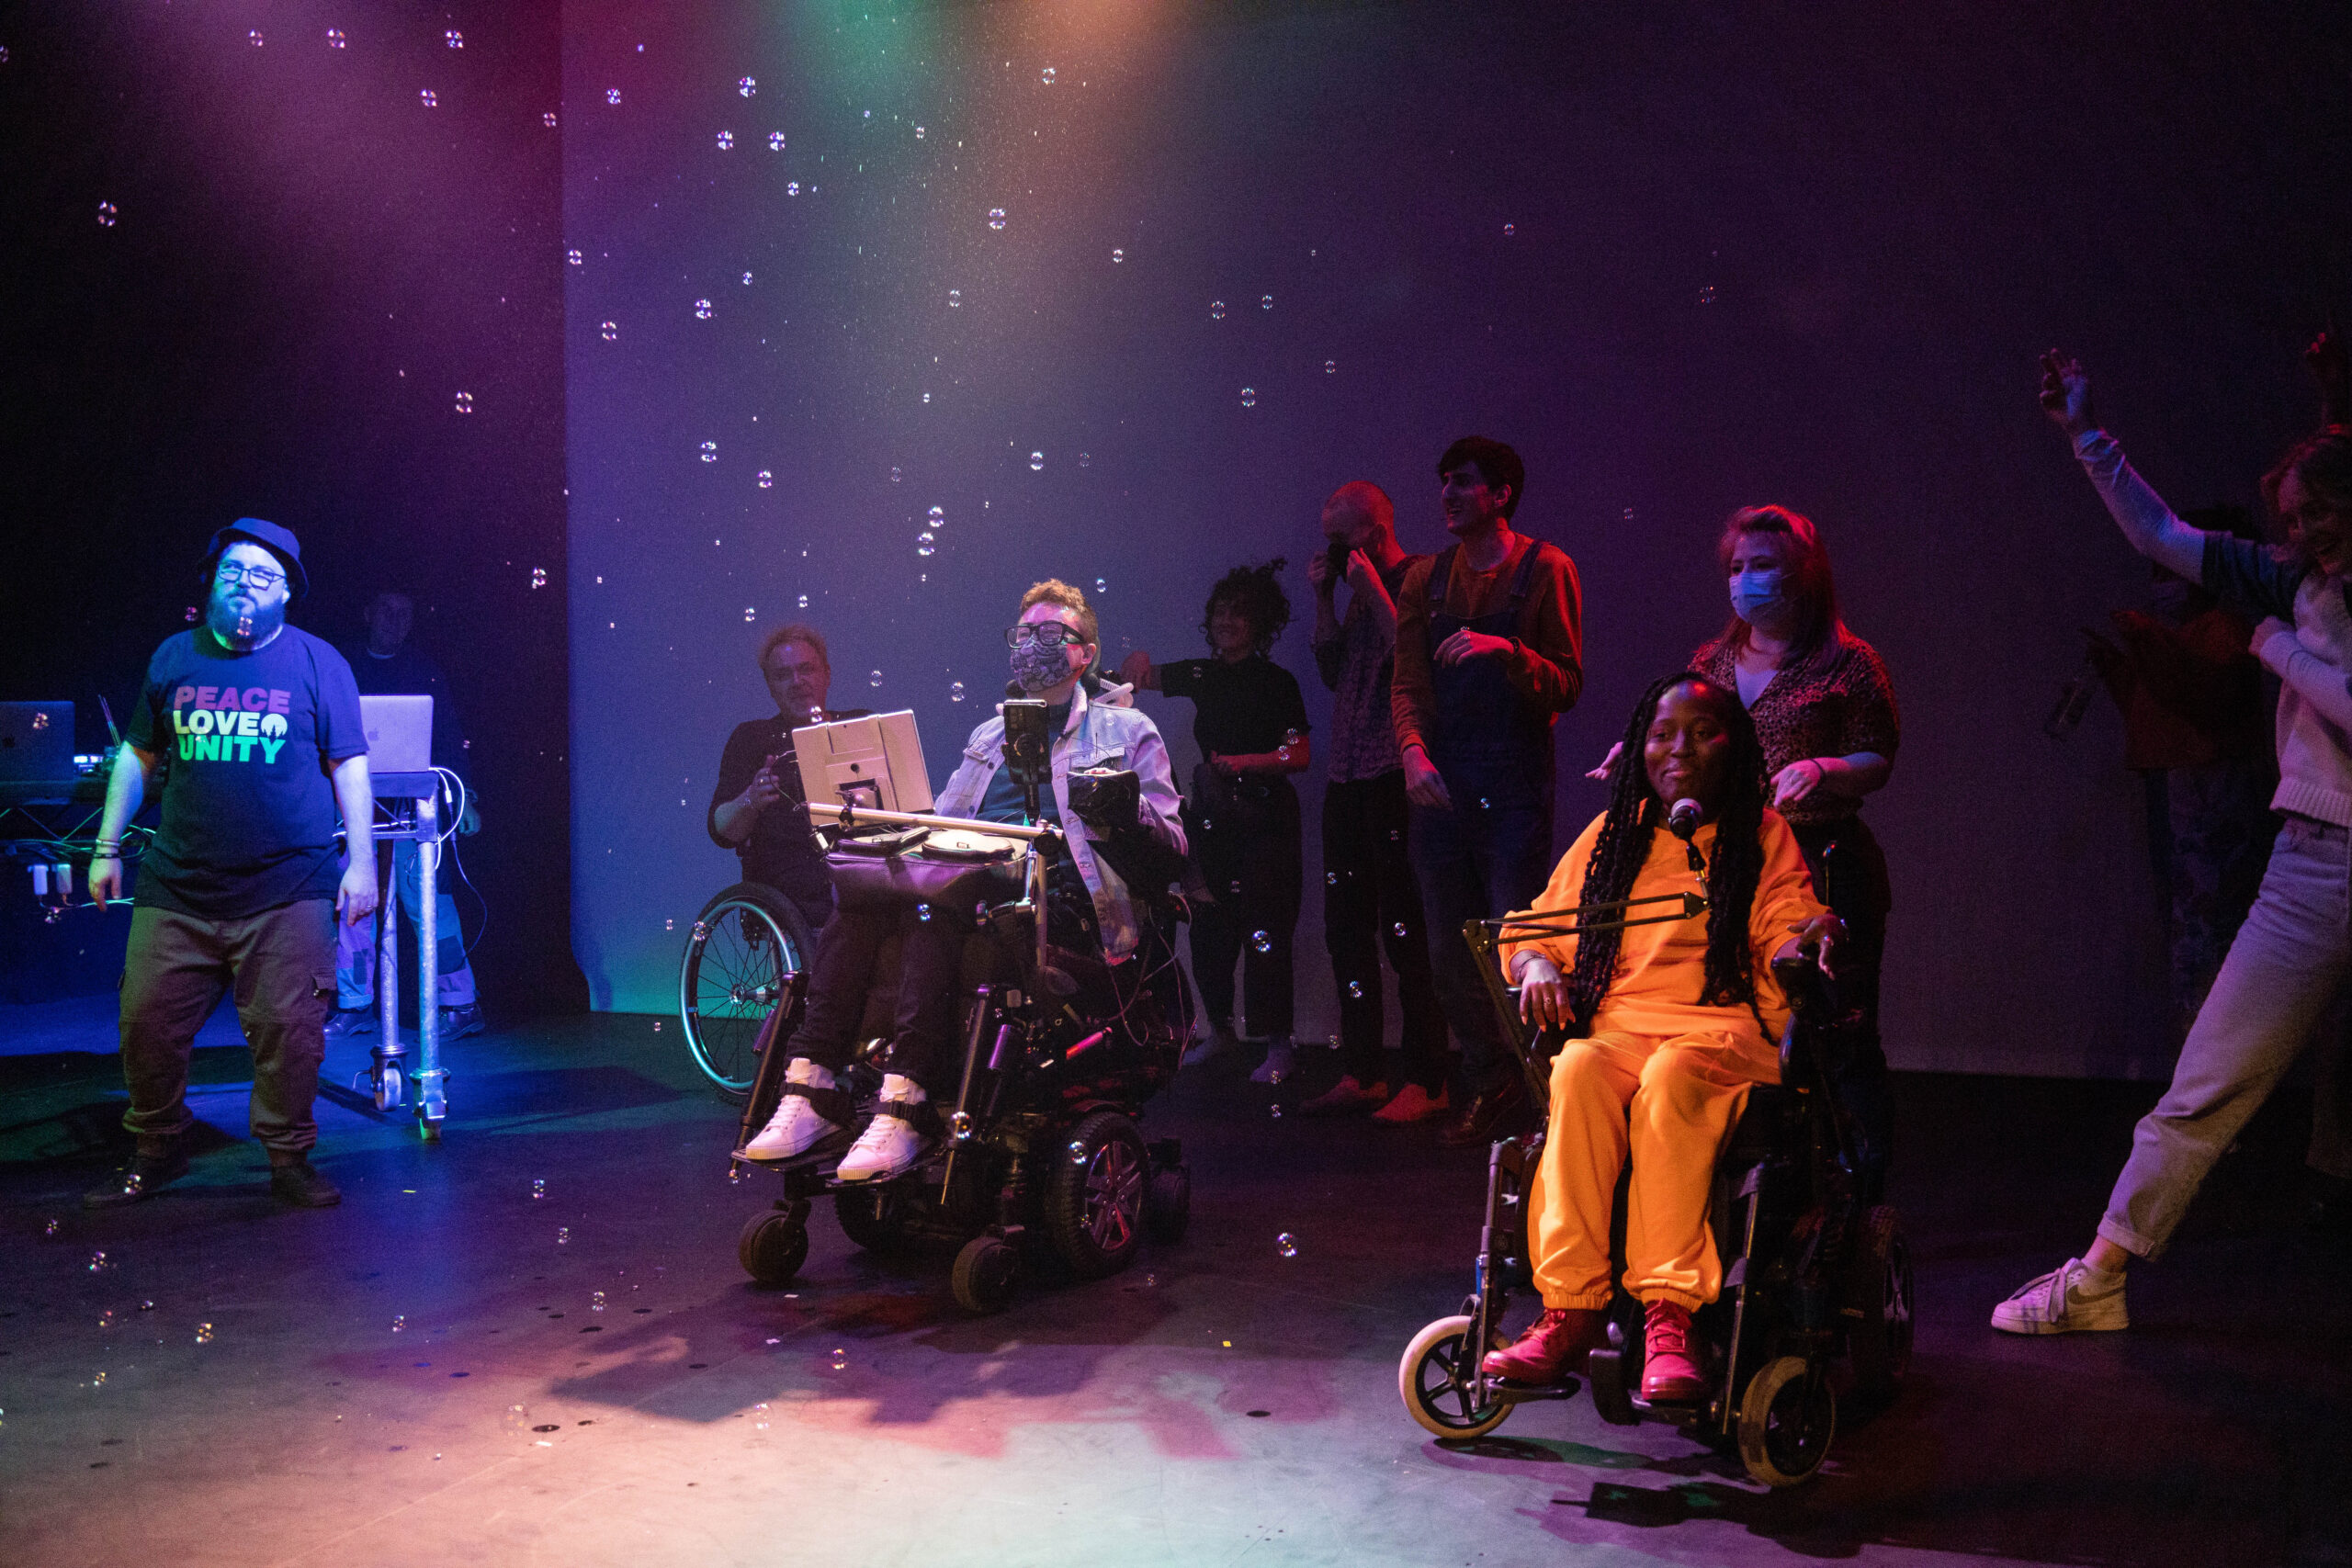 The cast & crew of the 2021 CRIPtic Showcase gather on stage for a final bow. They are bathed in blue and pink light and surrounded by bubbles.